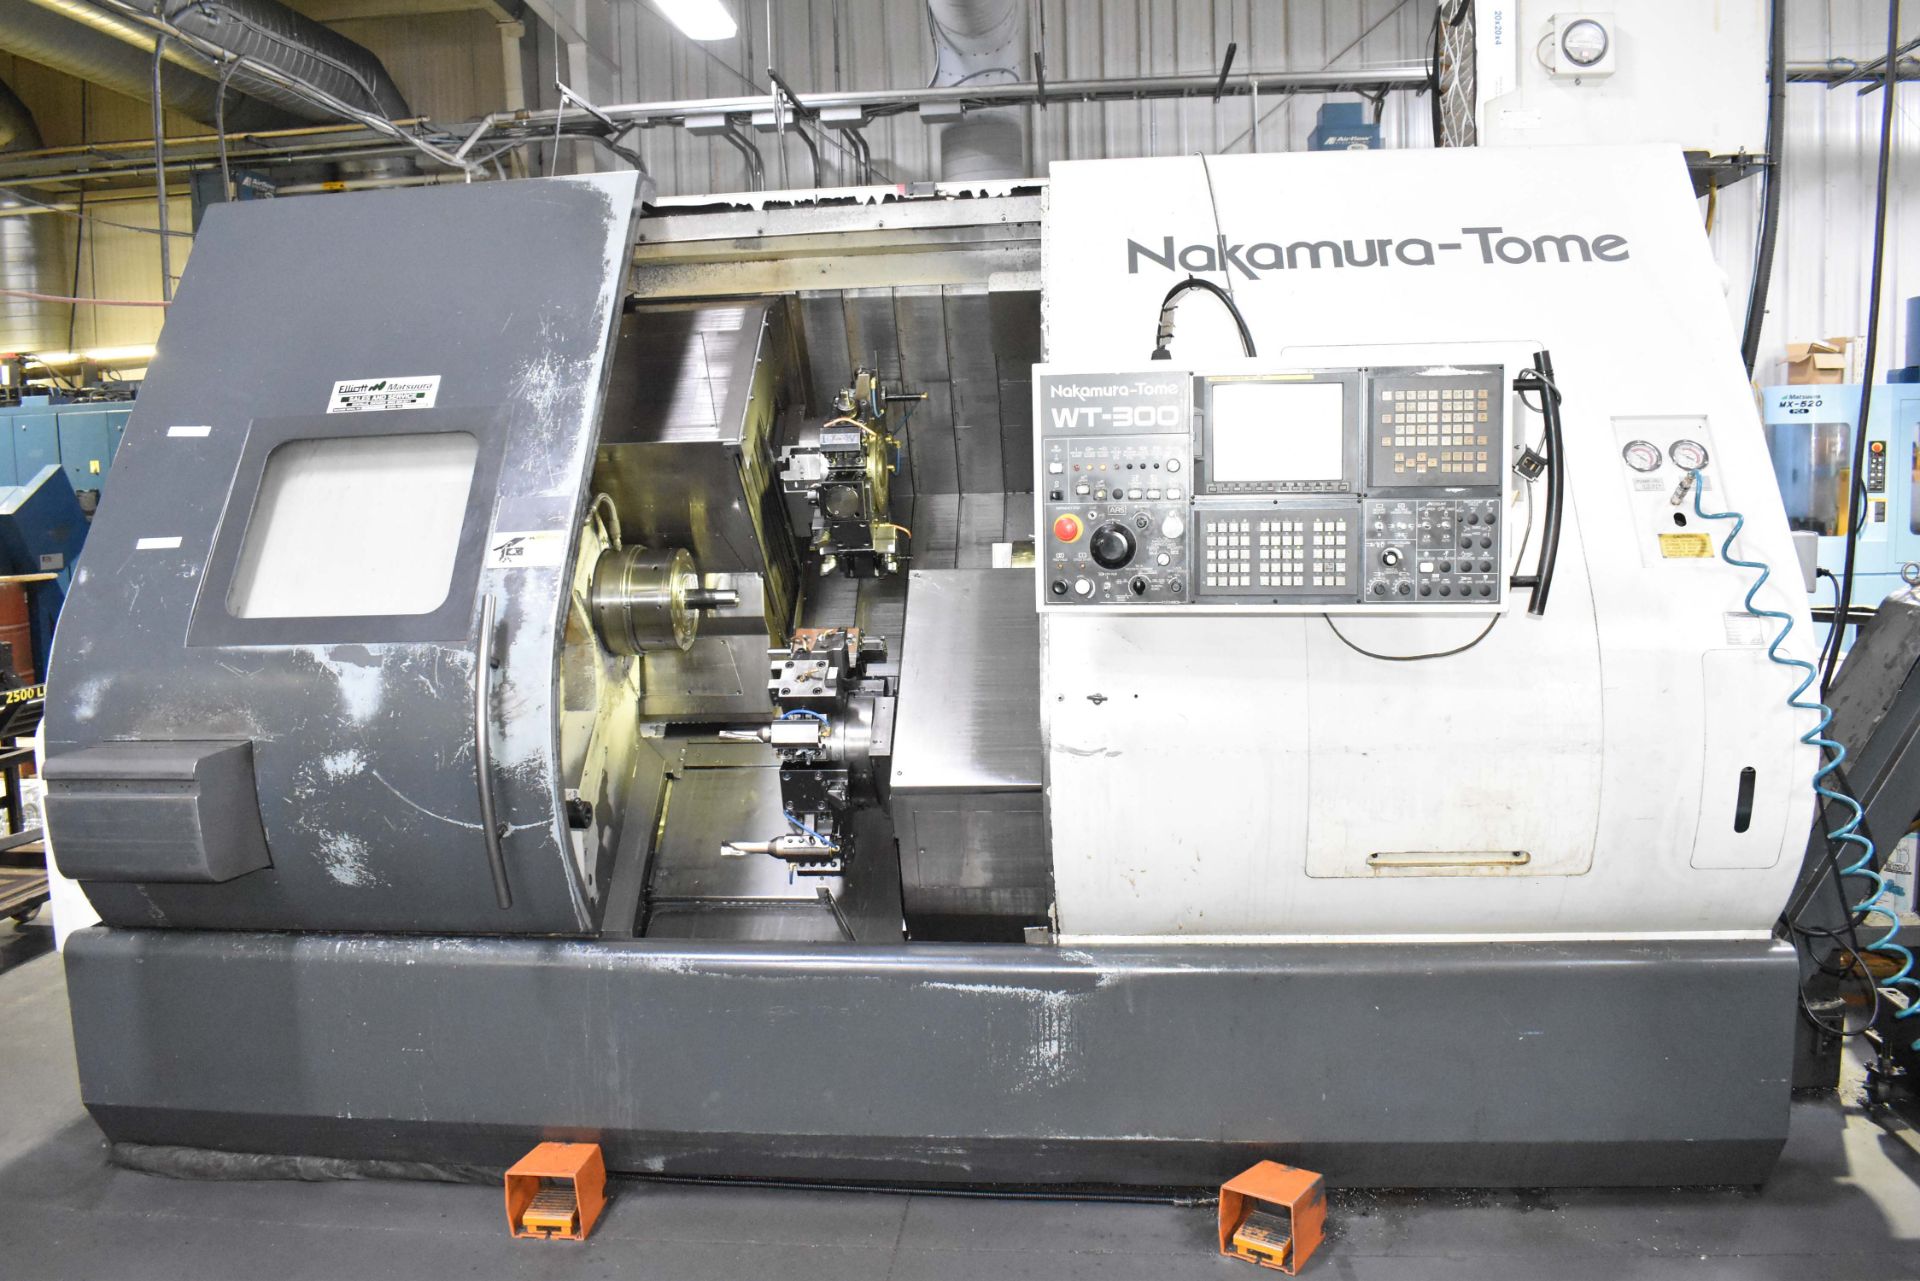 NAKAMURA-TOME (2007) WT-300 MMYS 7-AXIS OPPOSED SPINDLE AND TWIN TURRET CNC MULTI-TASKING CENTER